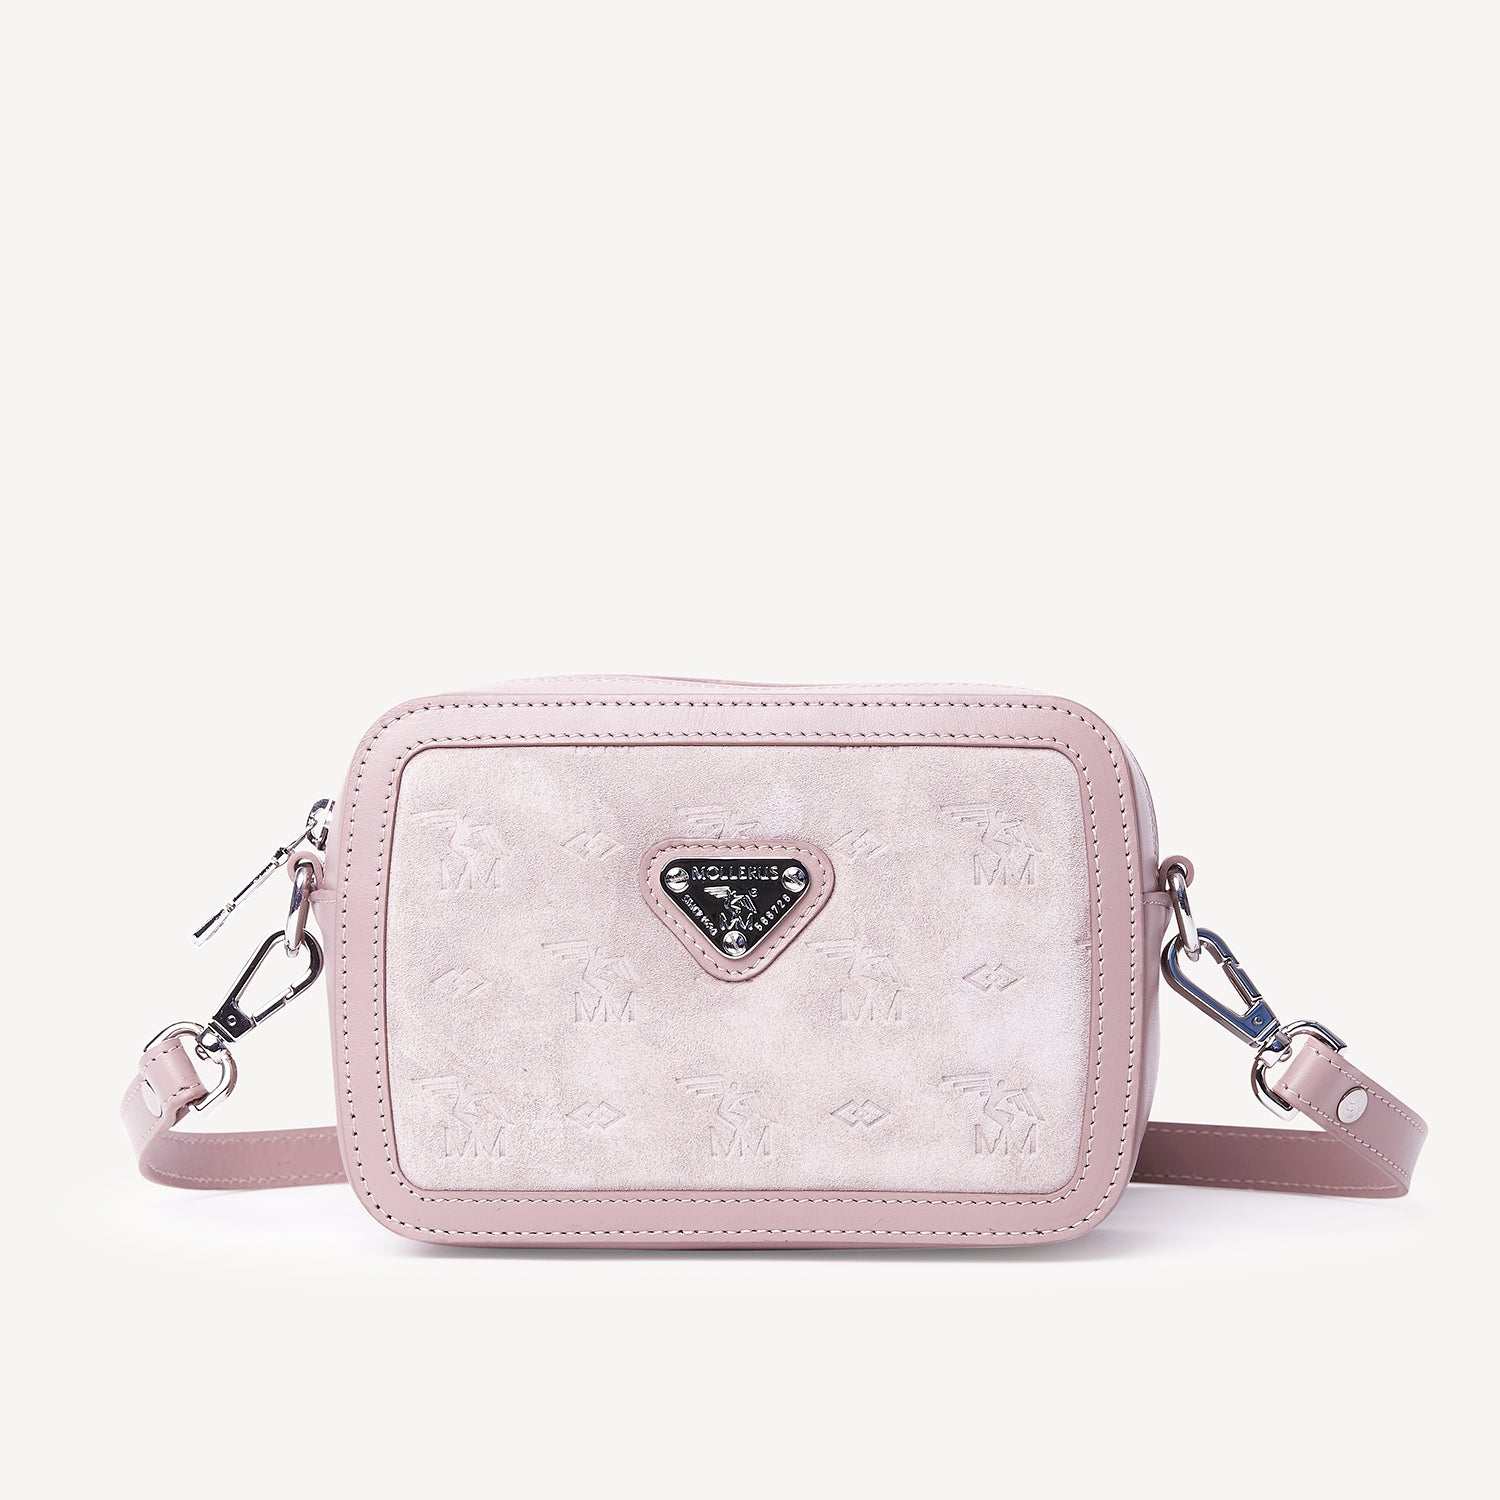 INWIL | Schultertasche Velour soft rosé/silber- FRONTAL